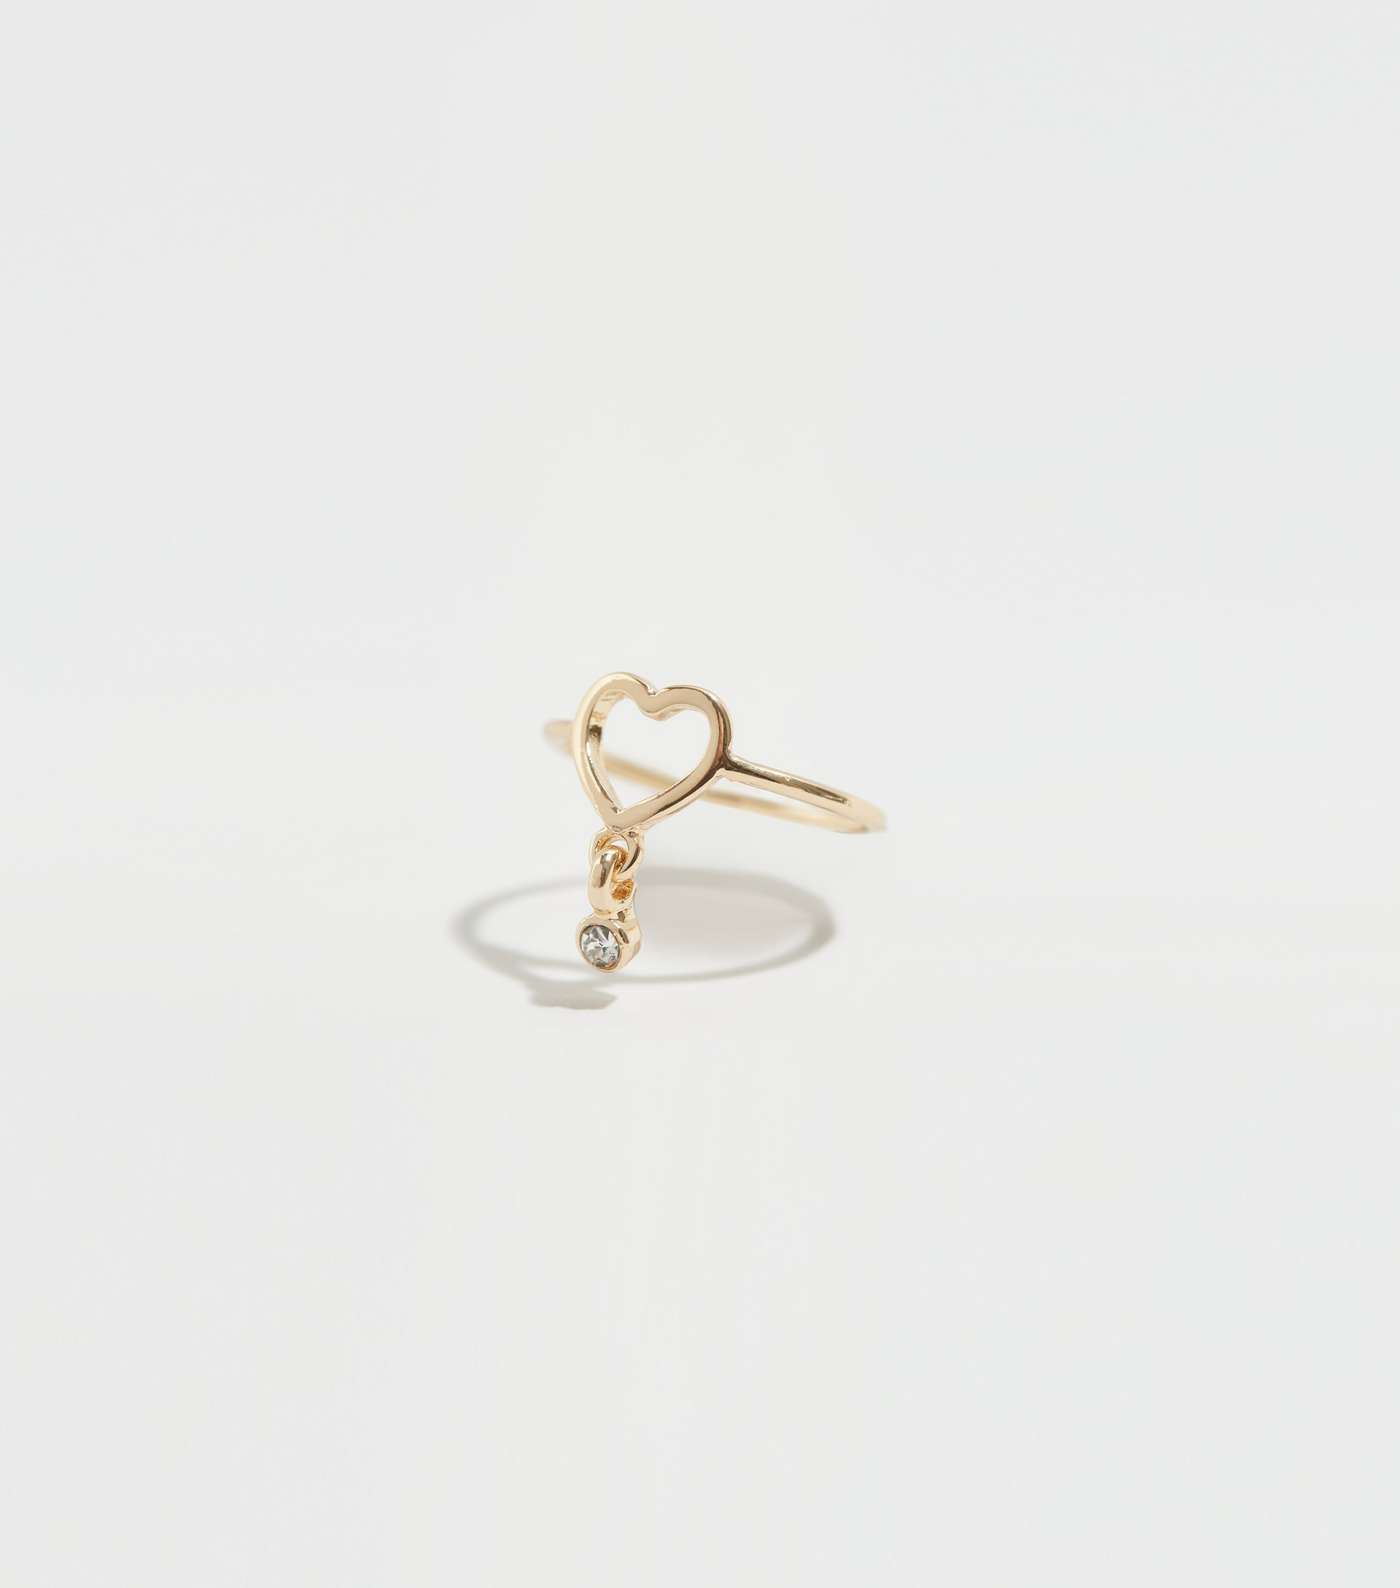 Gold Heart Sketch Ring Image 2